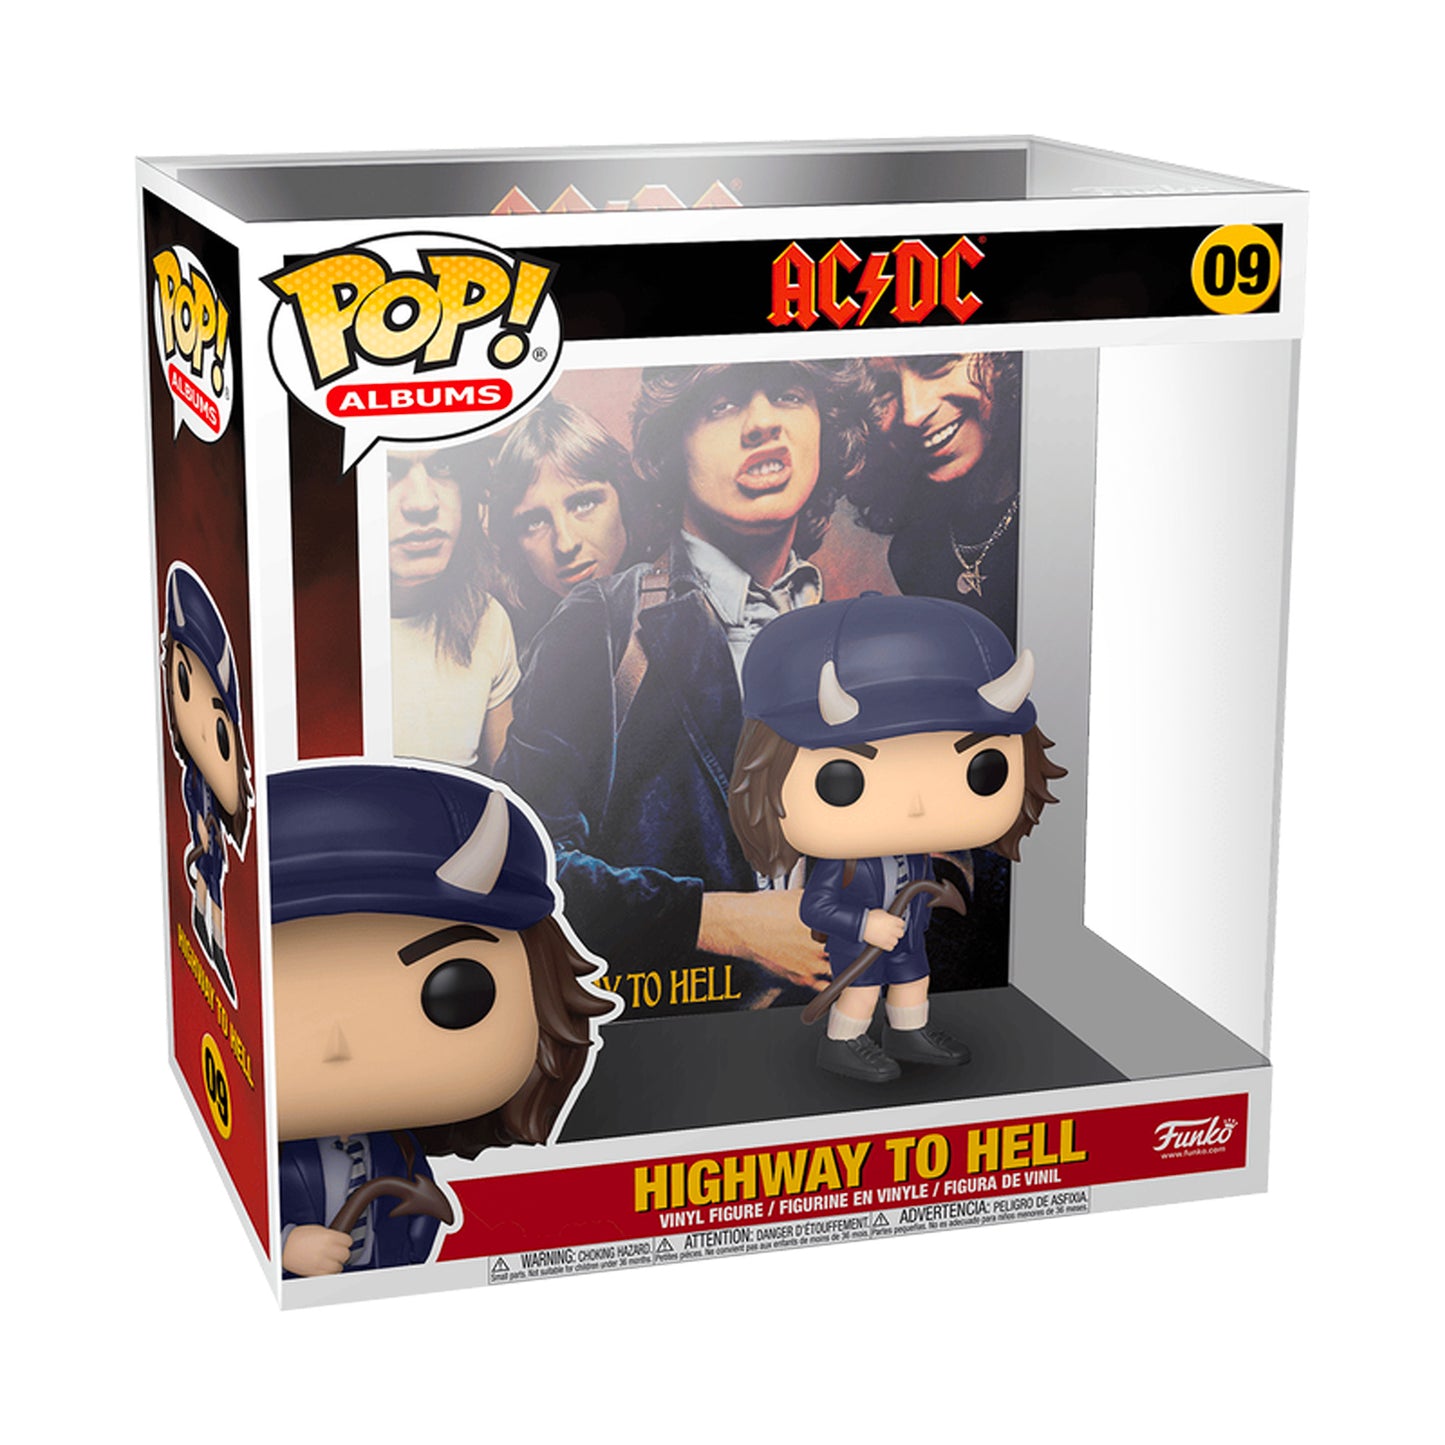 Funko Pop! Albums: AC/DC - Highway to Hell #09